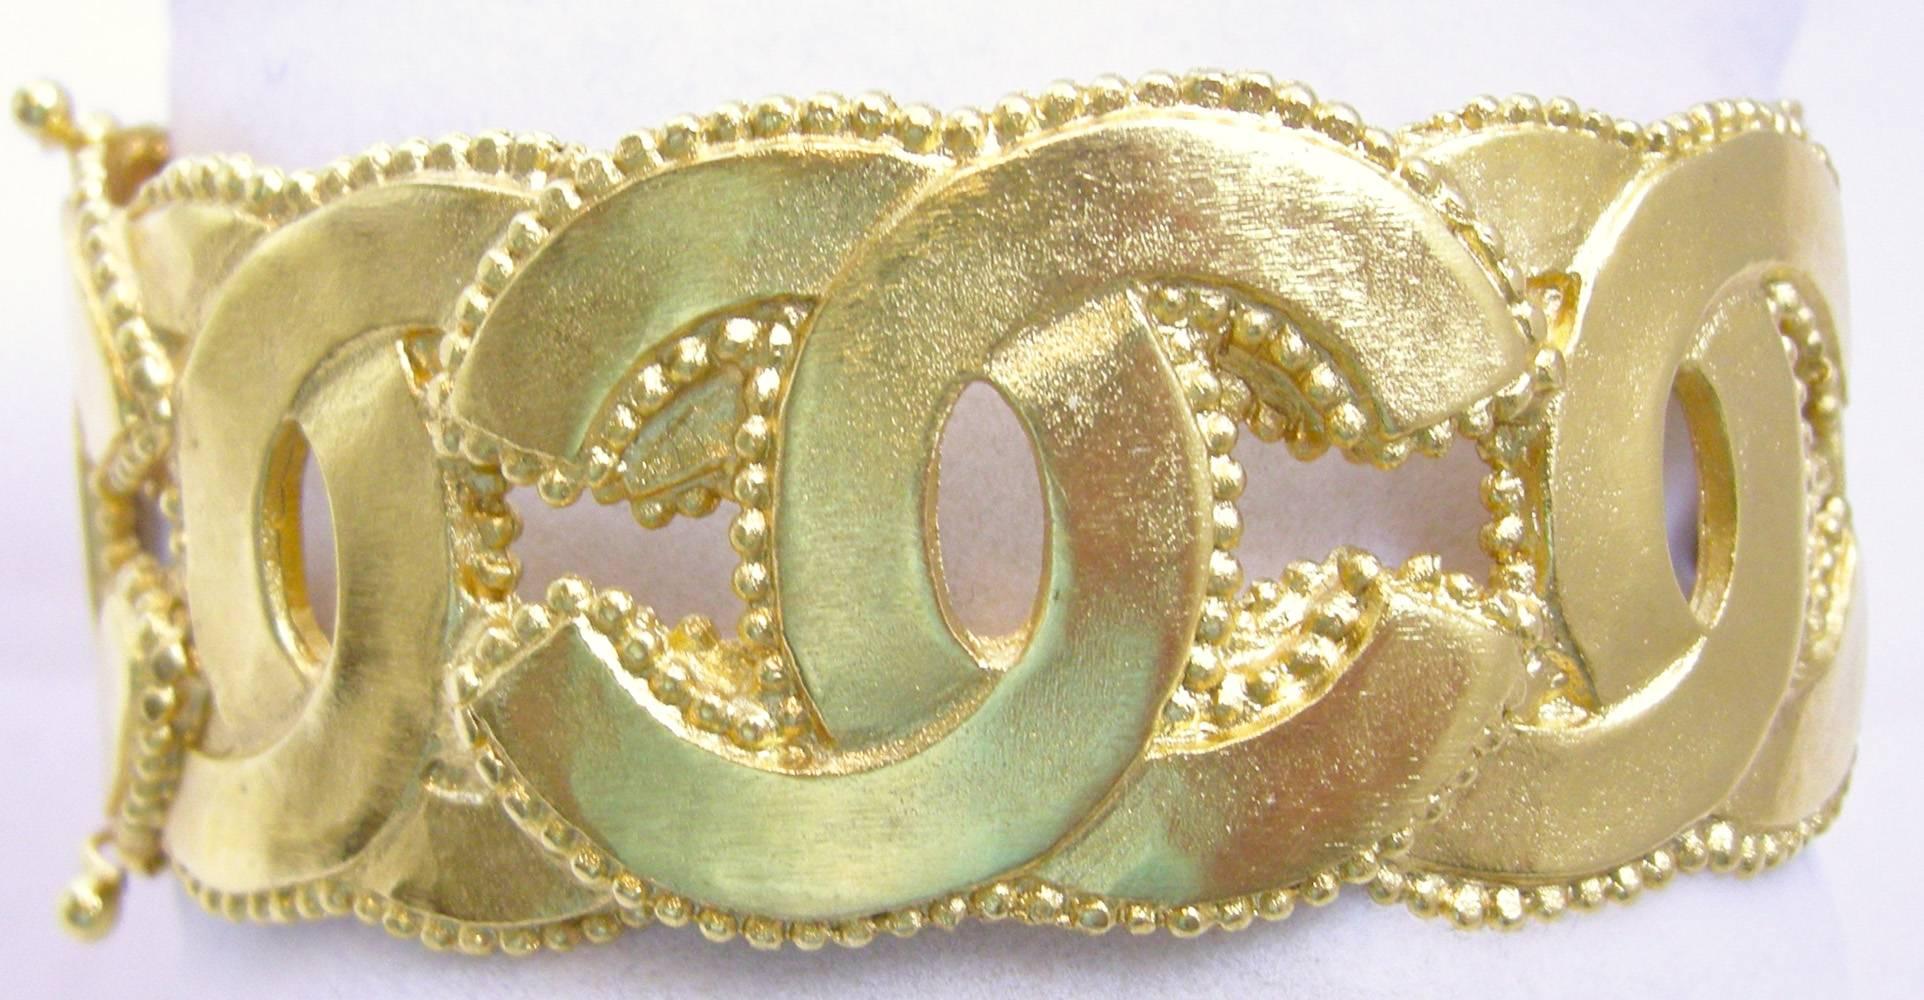 This is a wonderful vintage Chanel cuff bracelet.  It has the famous Chanel “C” going around with beaded trim.  It is set in a gold tone metal base metal and has a safety hook on each side for secure closure.  It measures 7” and a little over 1”